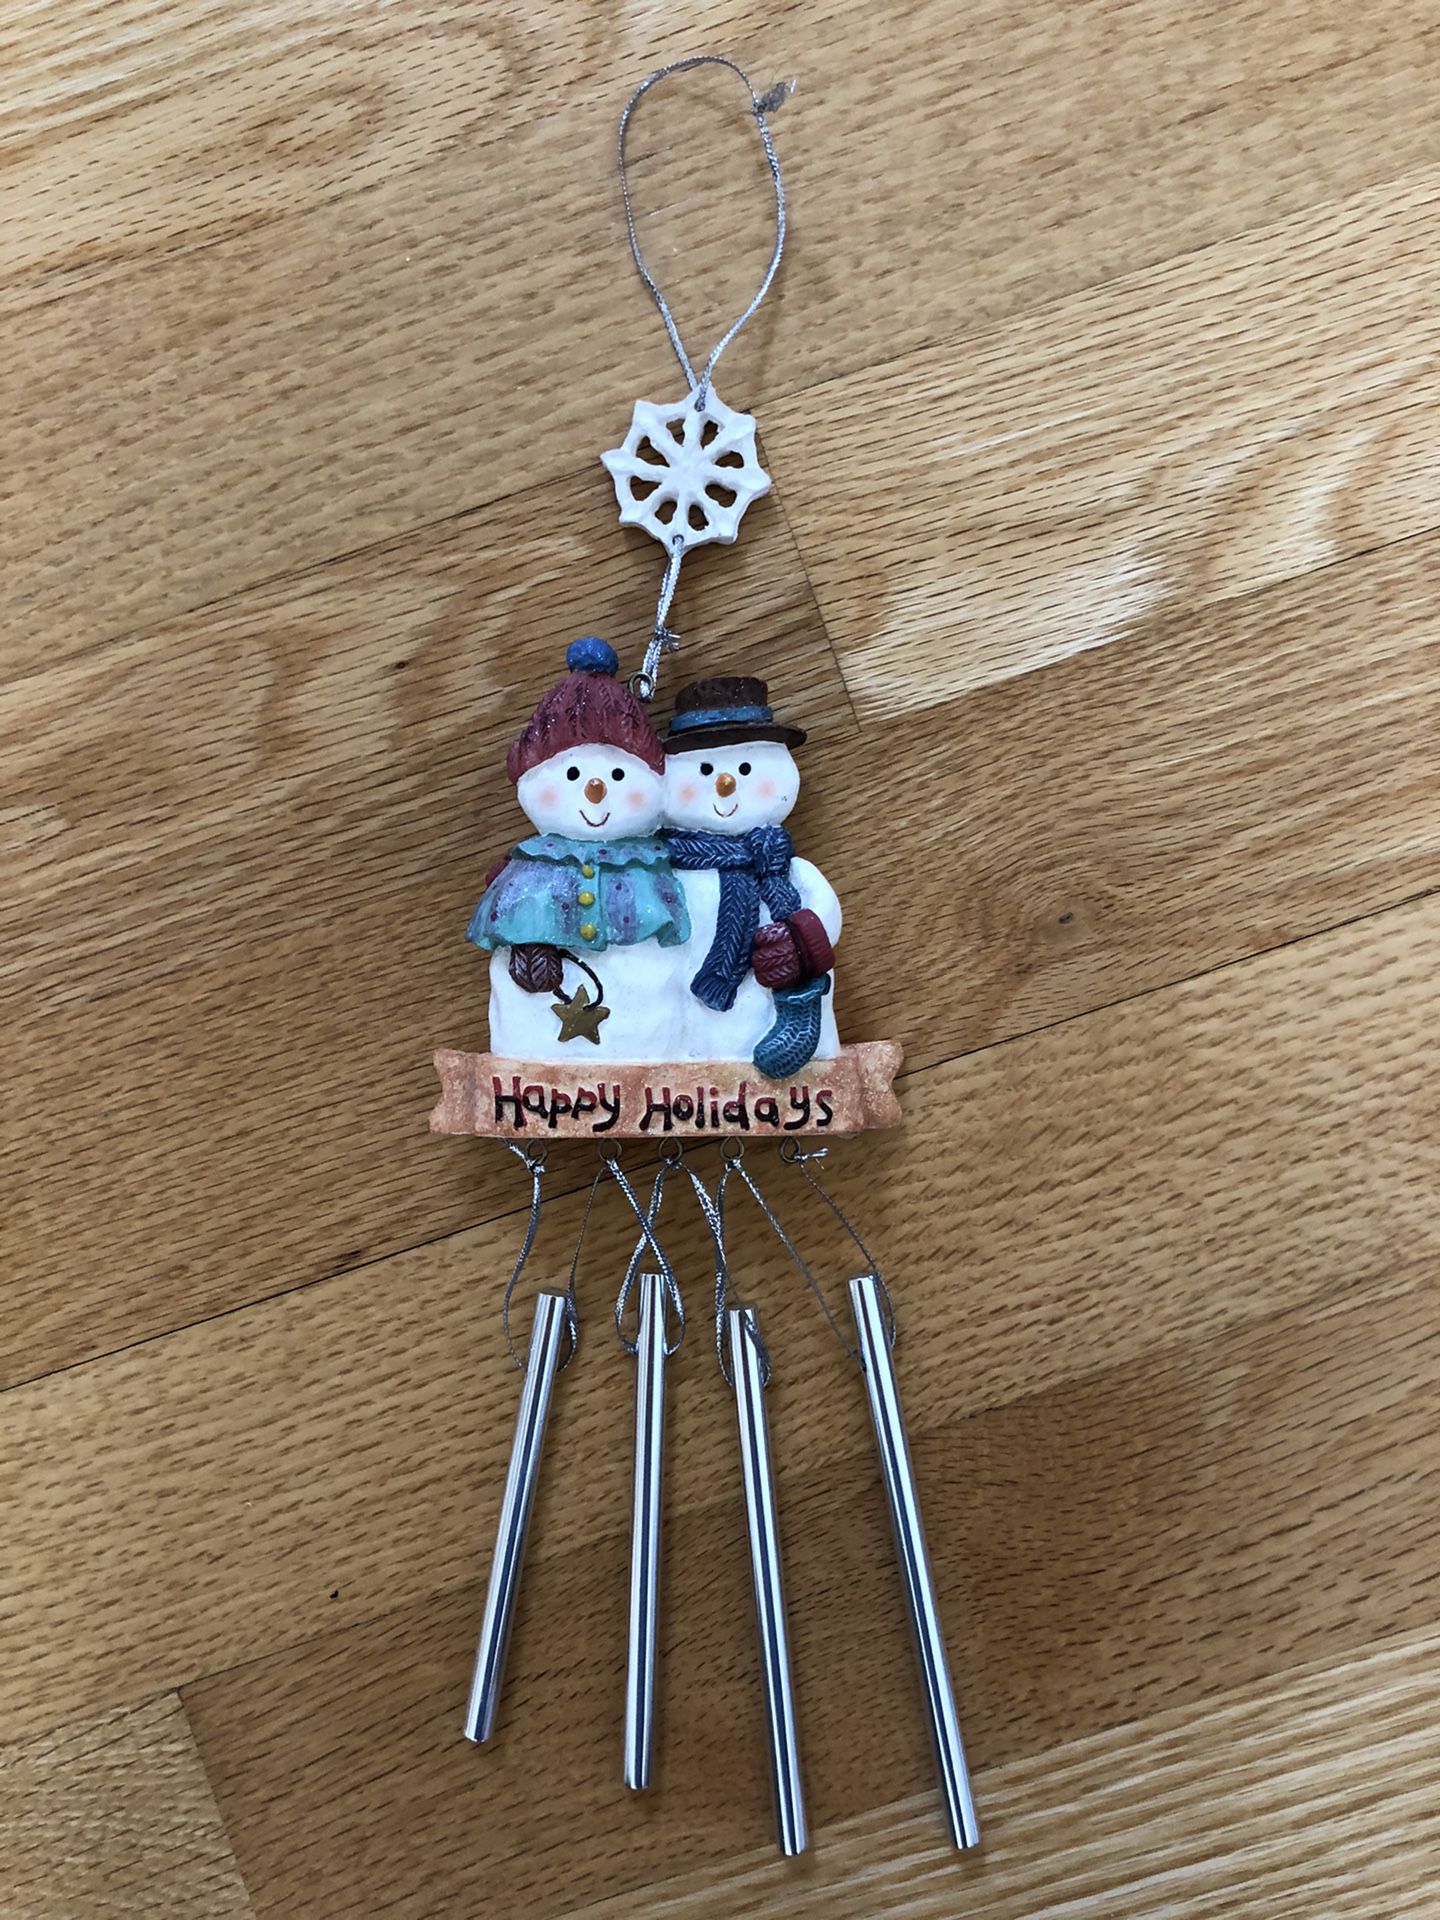 Happy Holidays Snowman Wind Chime